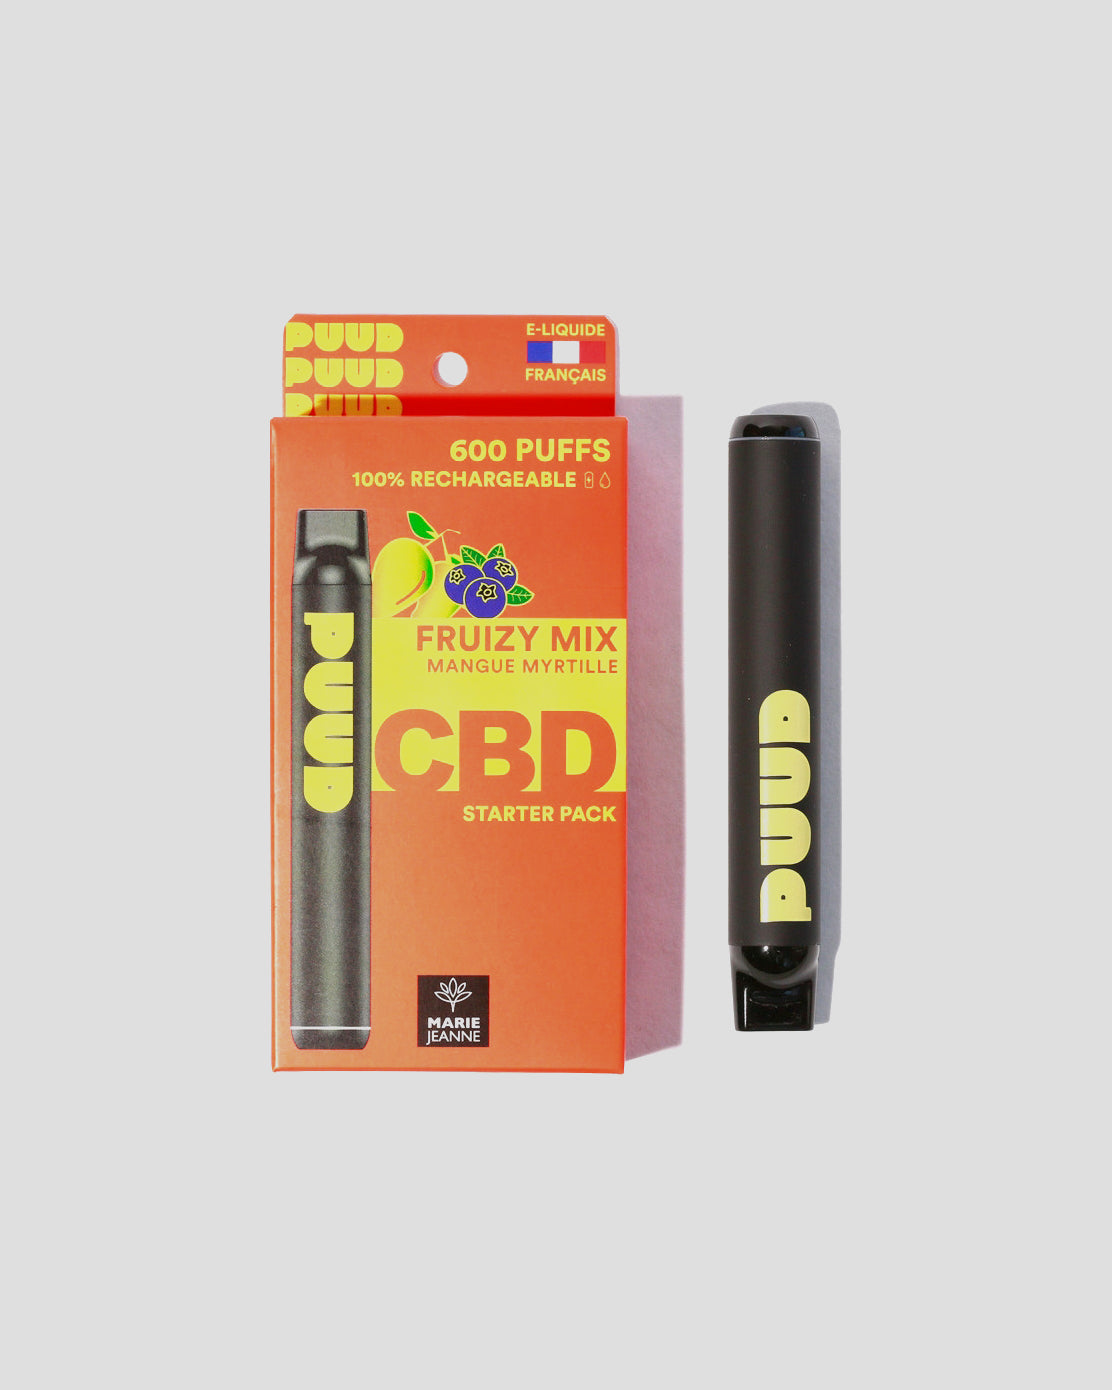 puff cbd rechargeable sans nicotine puuud fruizy mix